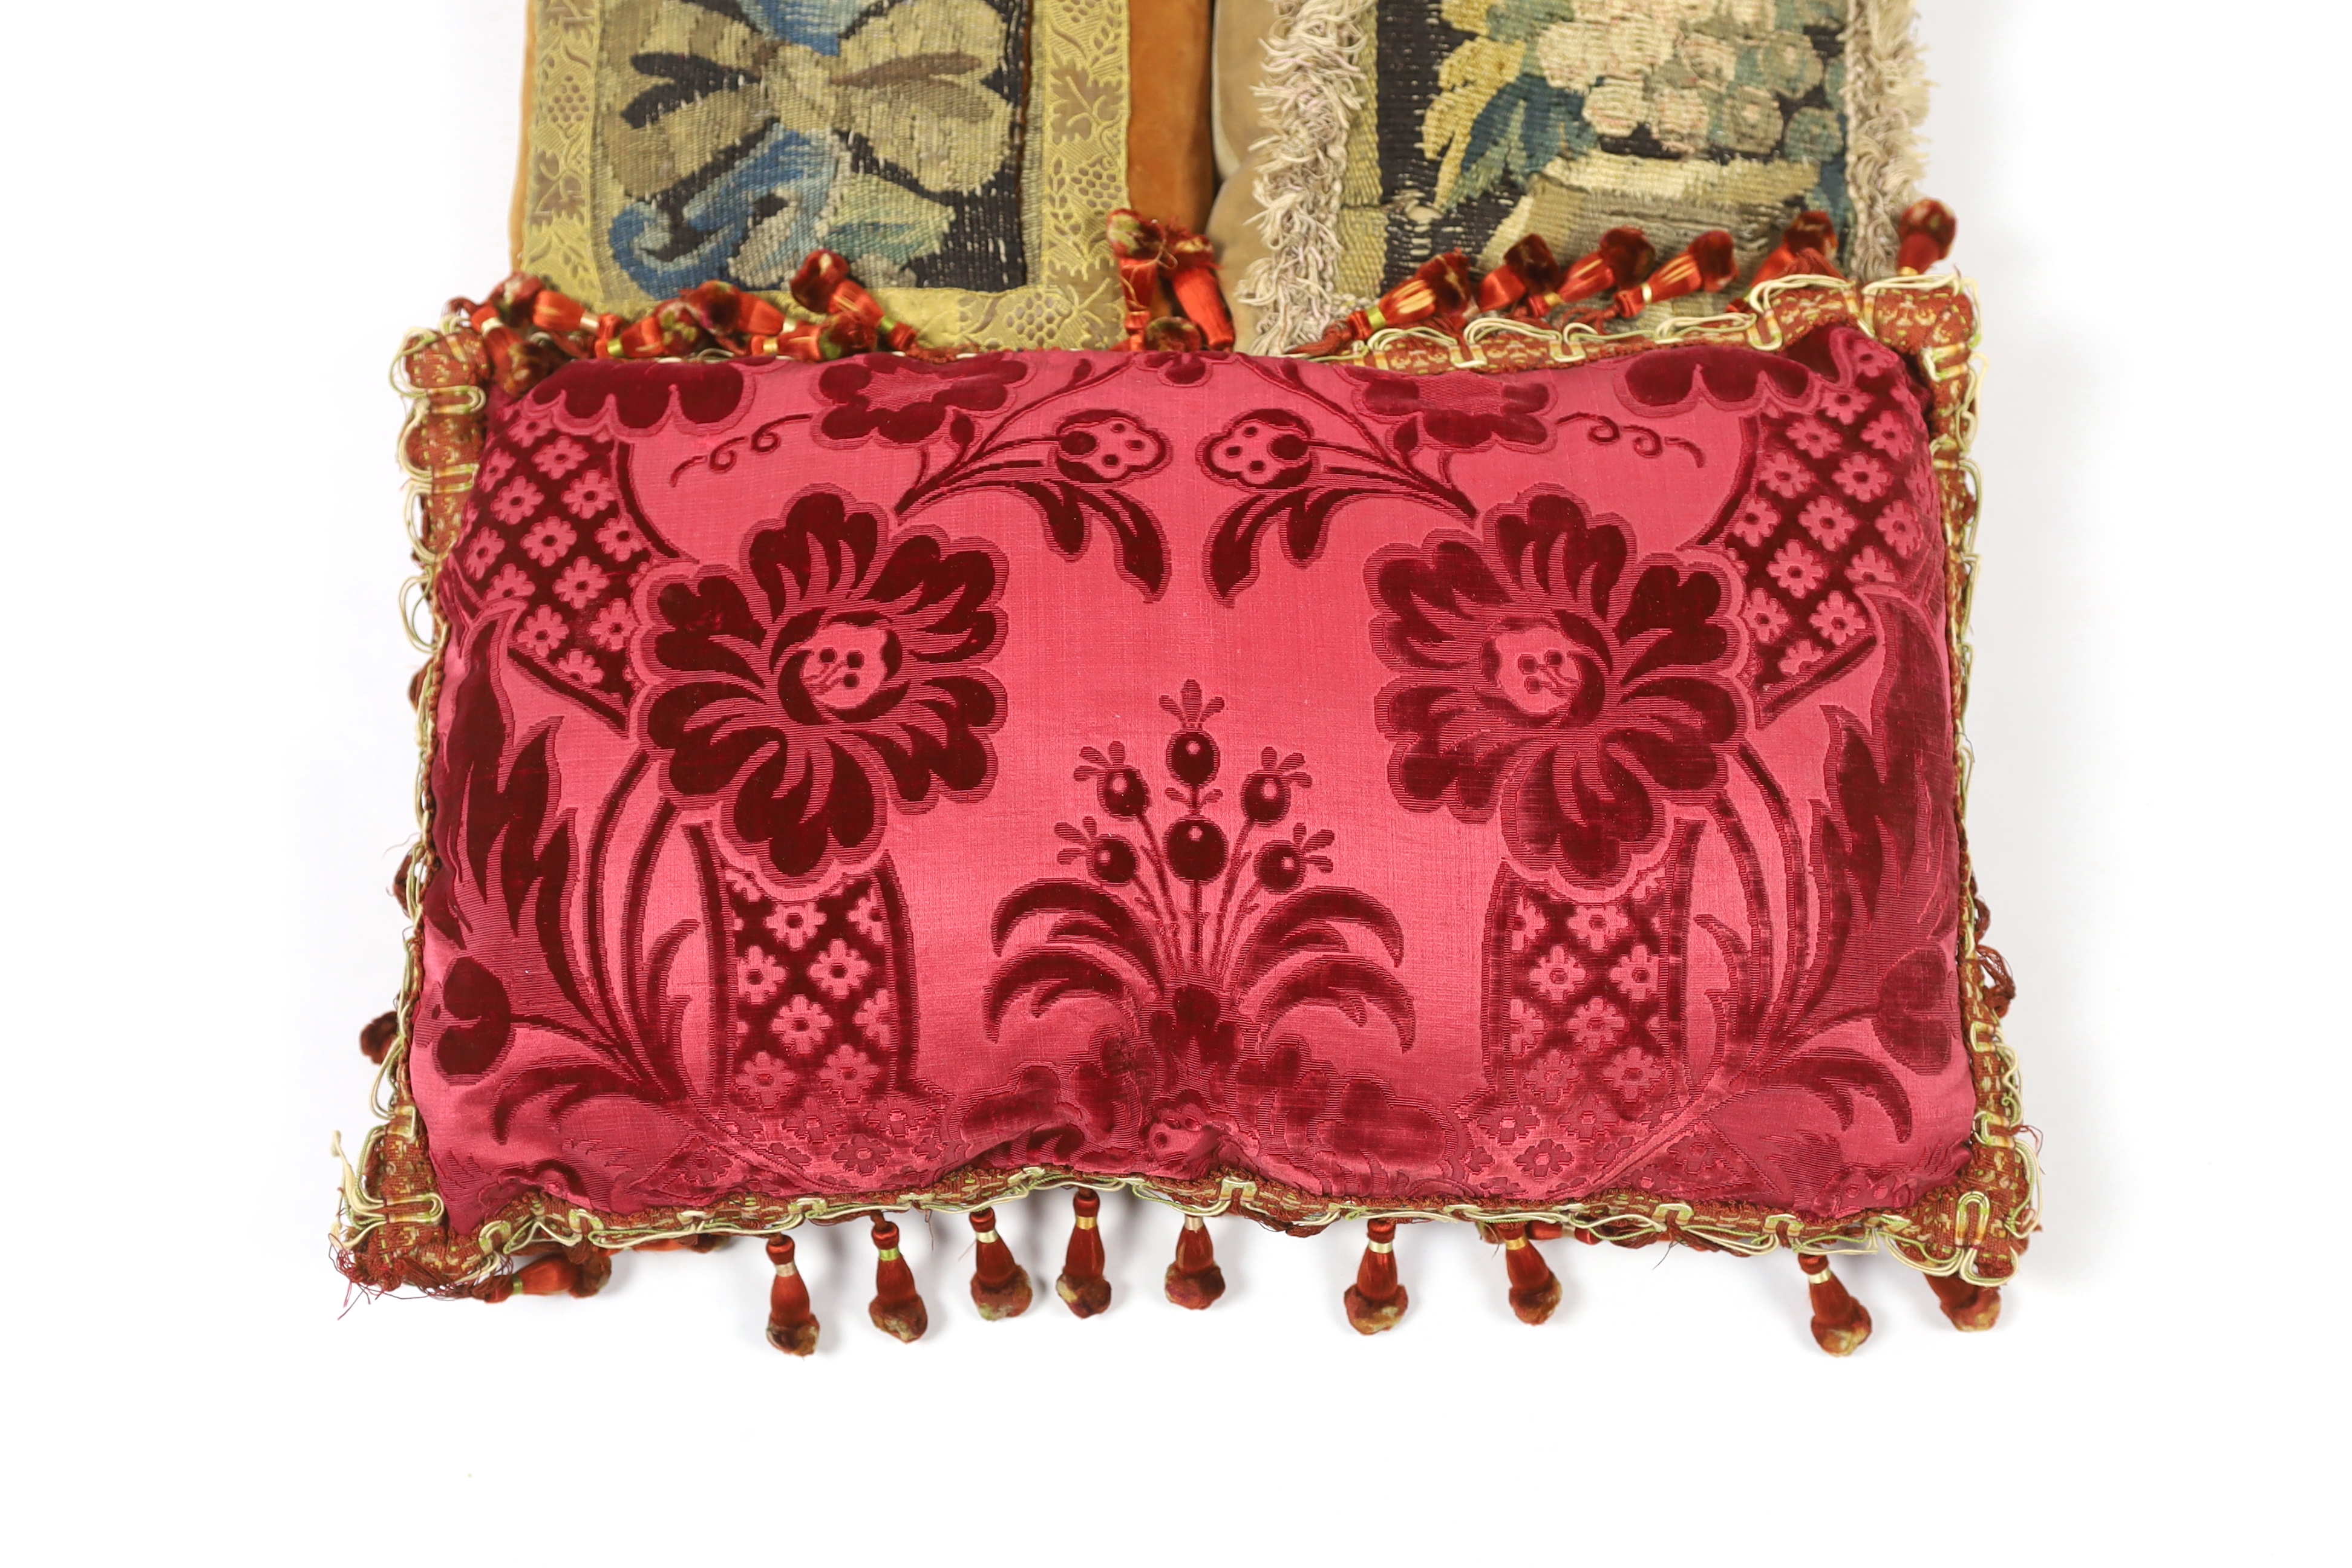 Two late 18th century Flemish verdure tapestry fragments made into cushions, plus a 19th century French Aubusson and an early 19th century Italian burgundy cut velvet damask panel, both made into cushions, all trimmed wi